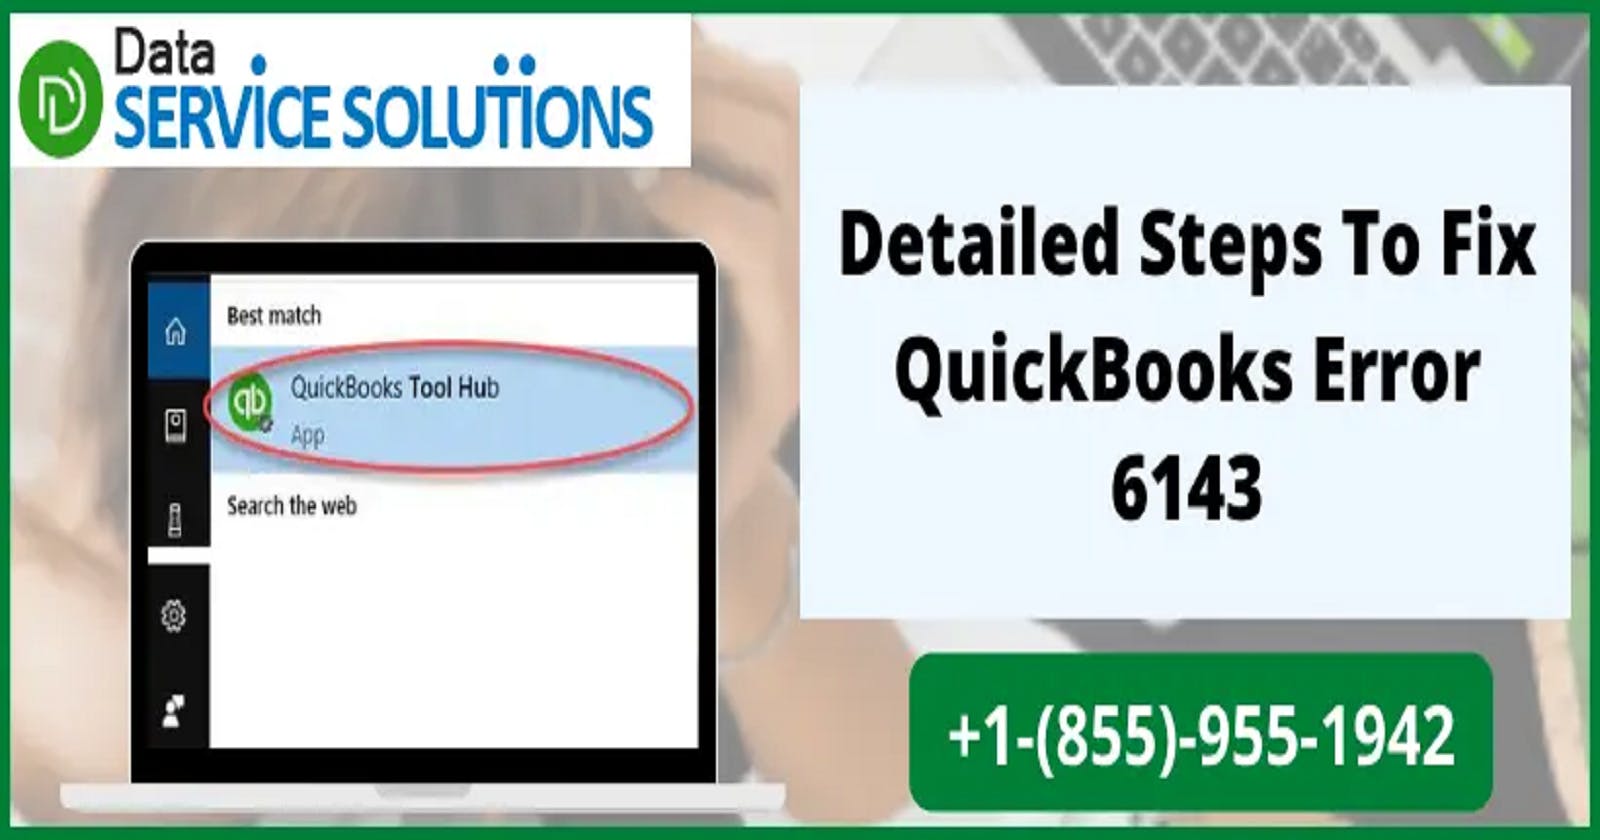 QuickBooks Error 6143: What is It and How to Fix it?